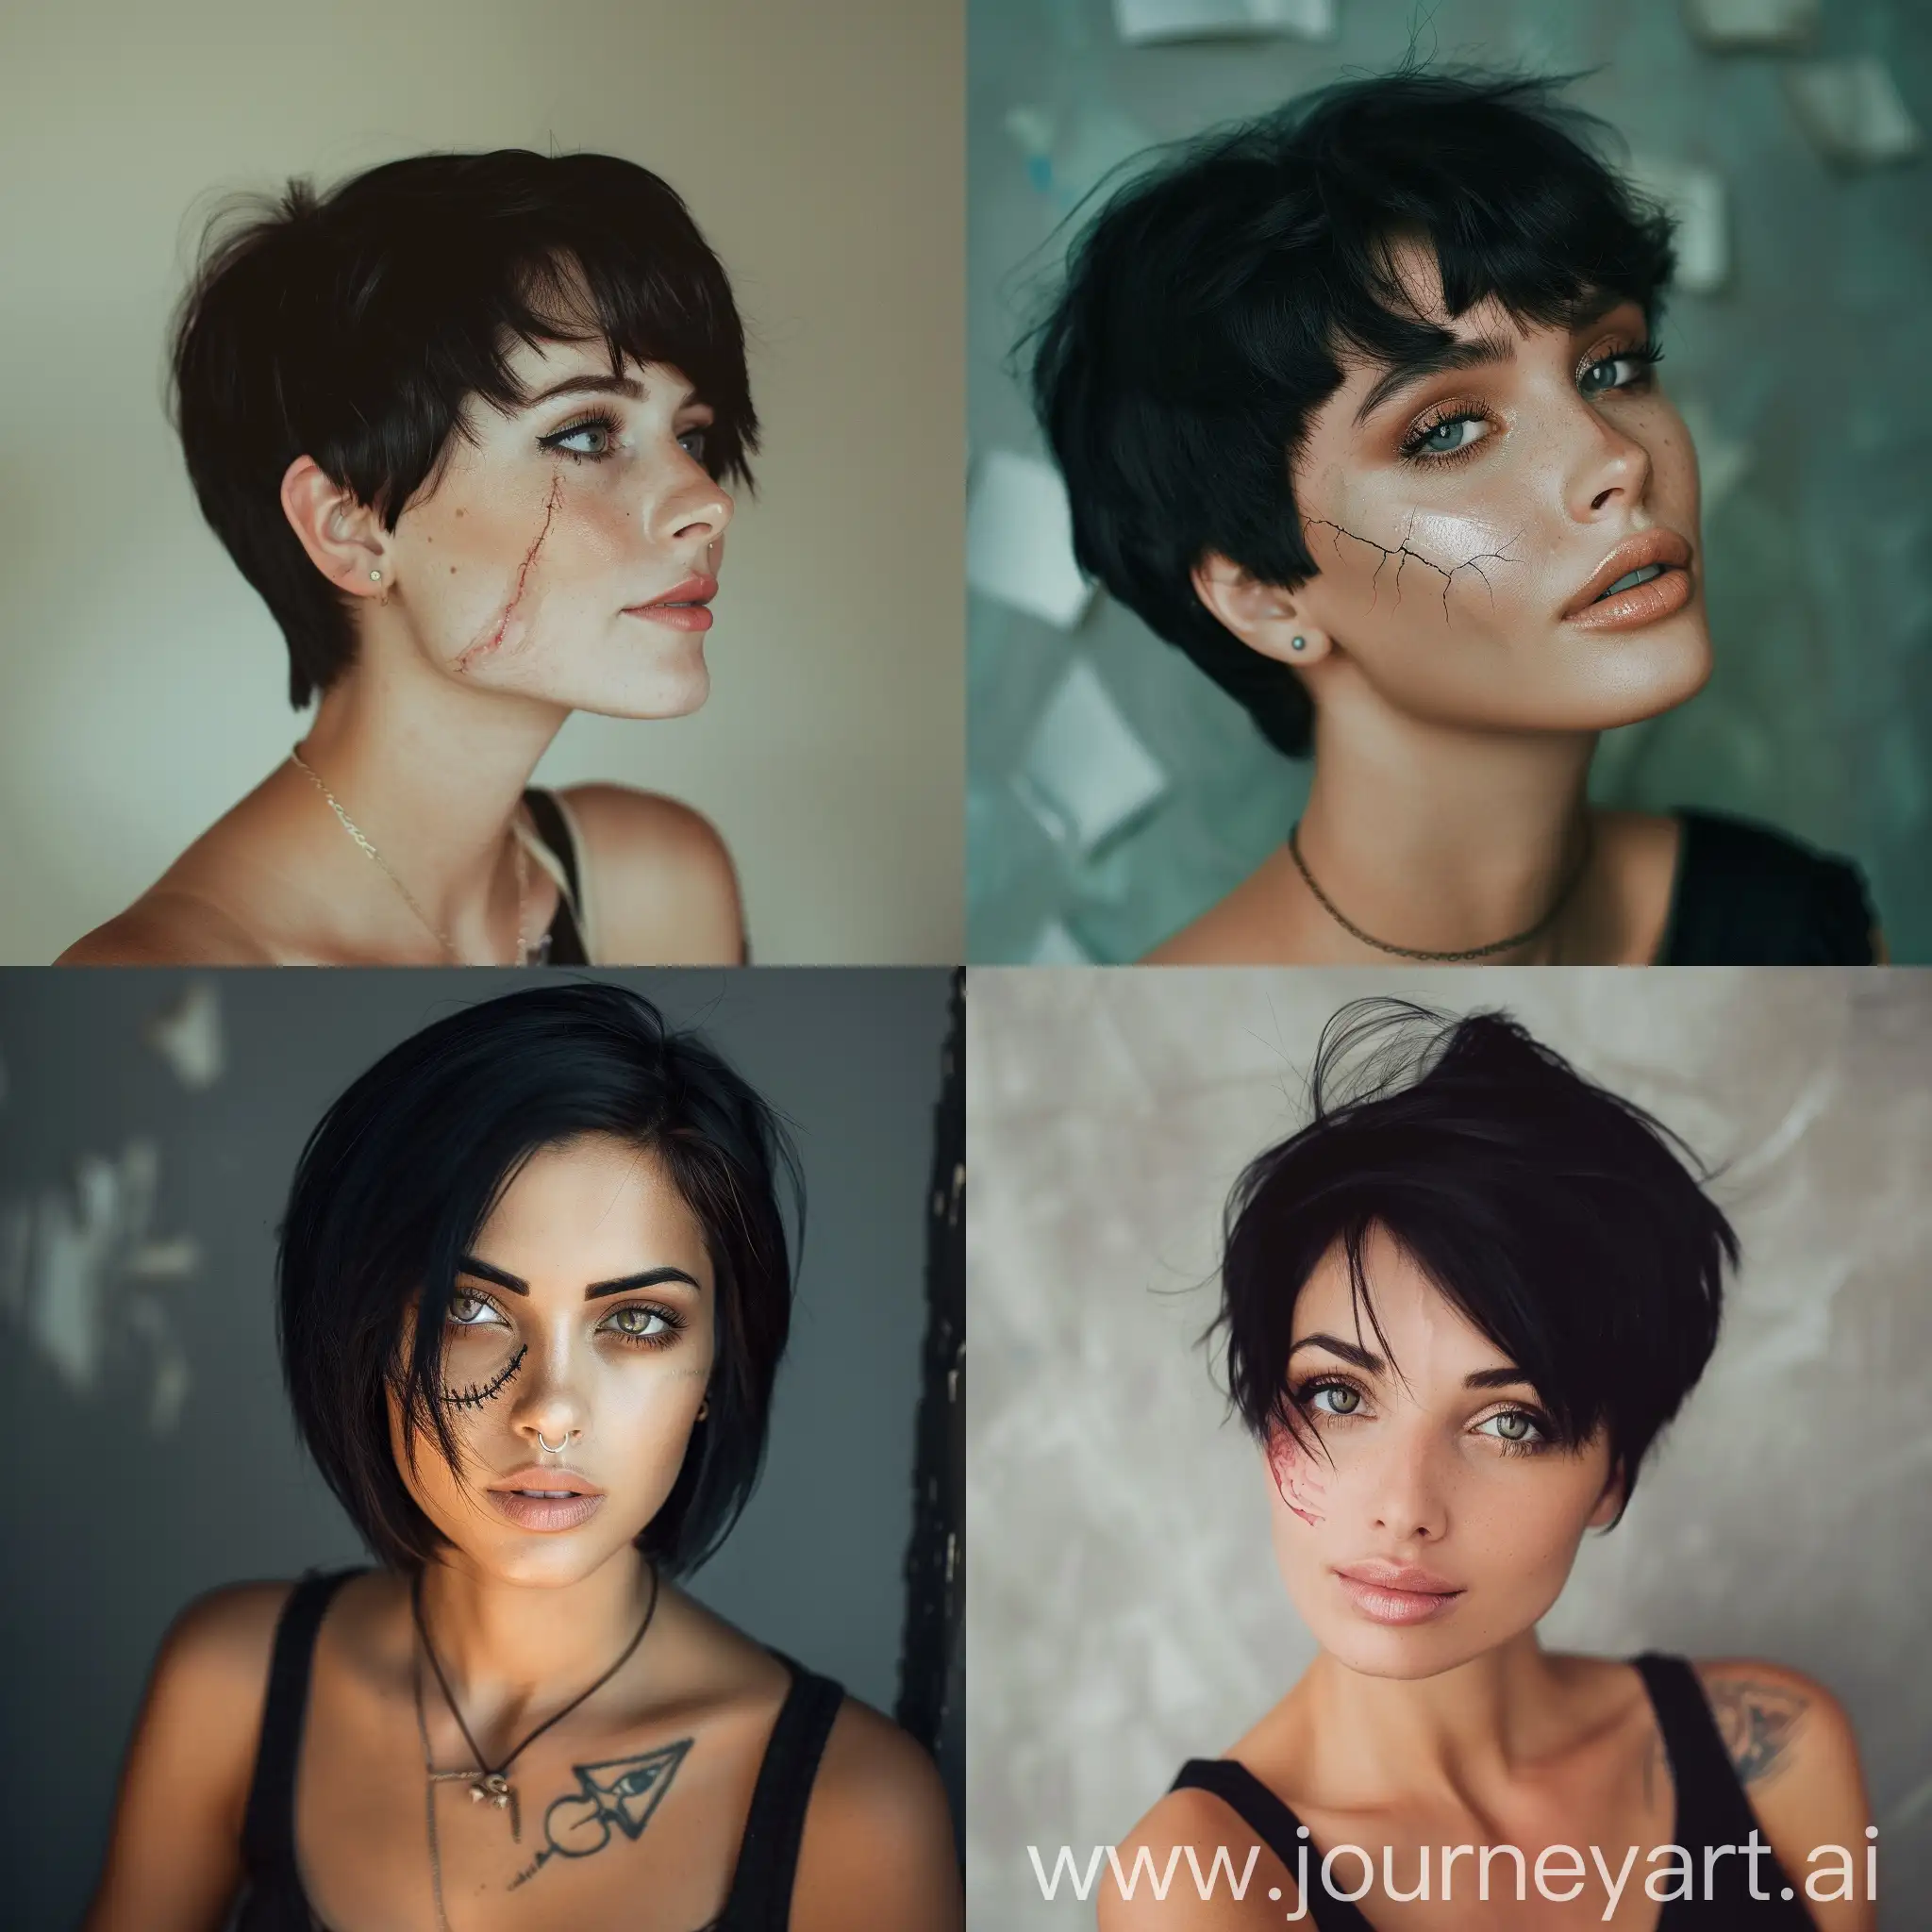 Stylish-Woman-with-Short-Black-Hair-and-a-Facial-Scar